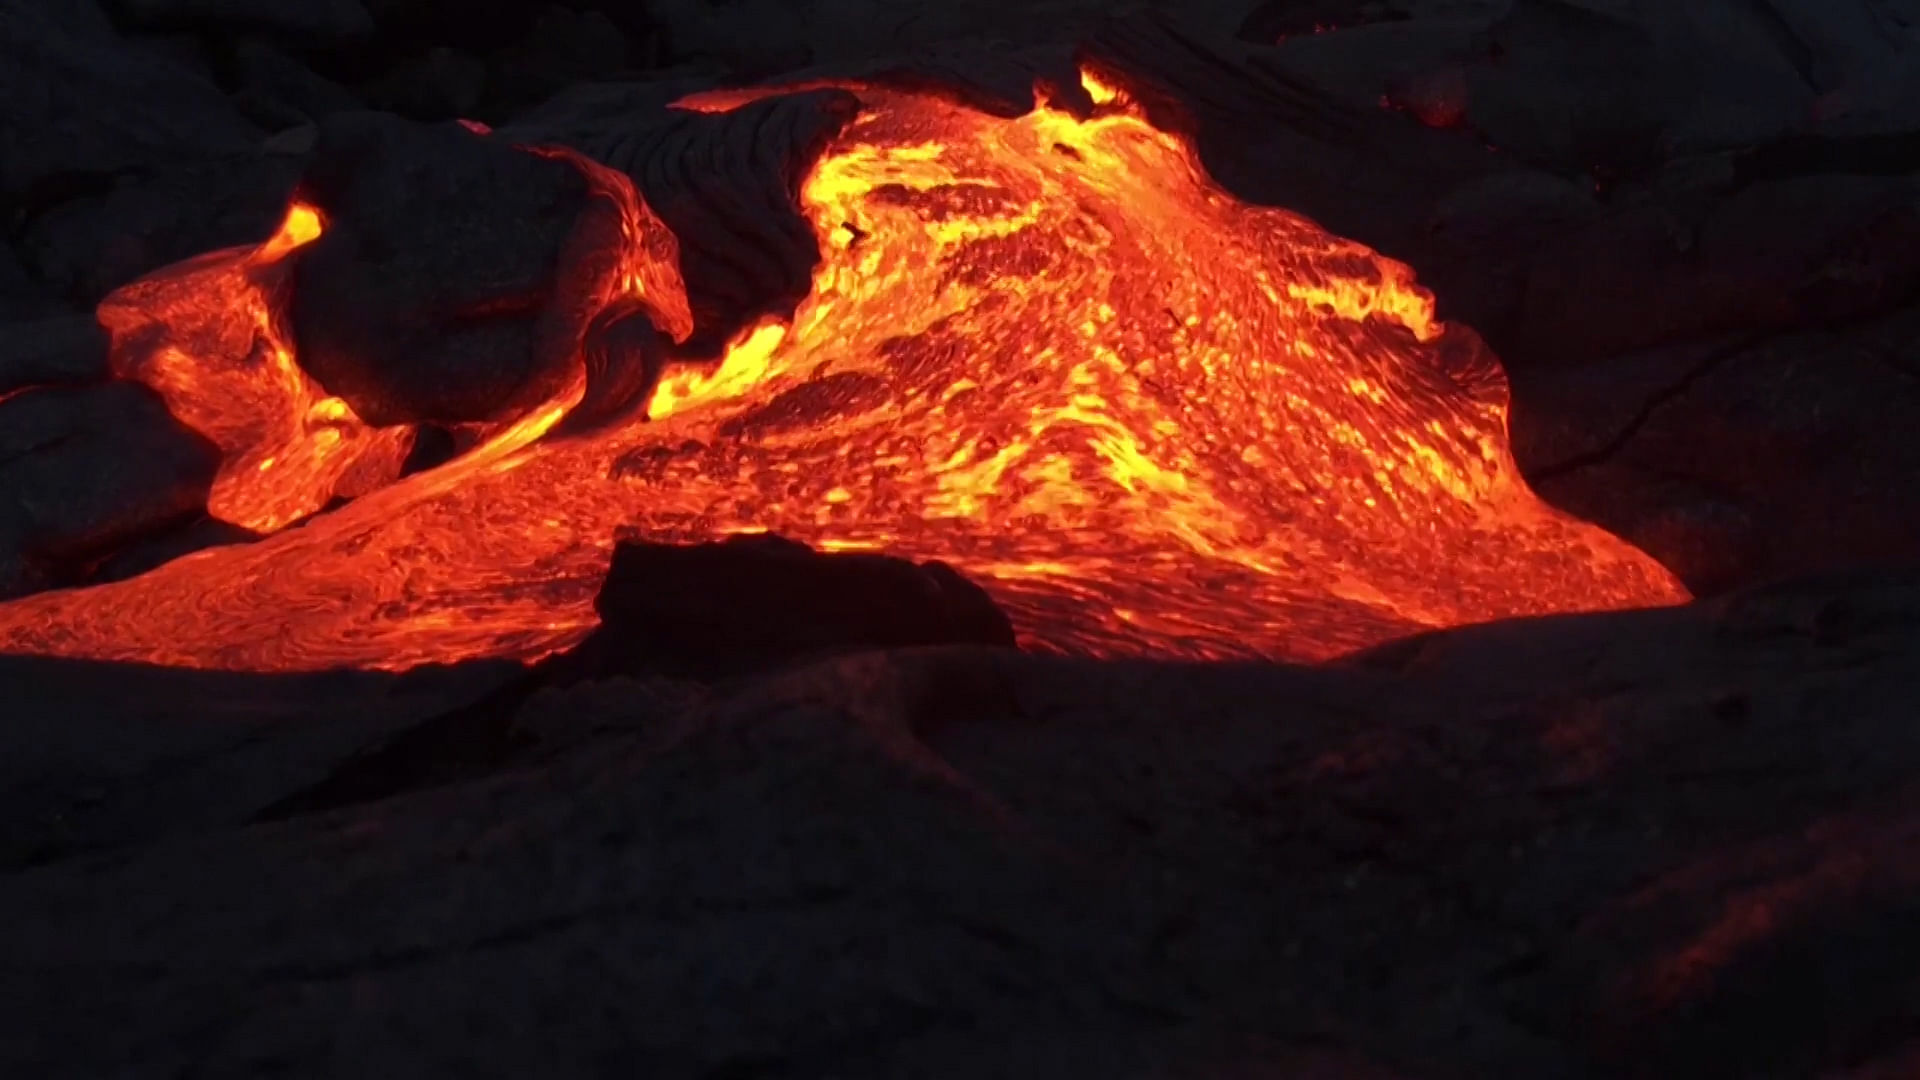 

Hawaii’s Kilauea is among the most active volcanoes of the world. (PHOTO: Caters TV)